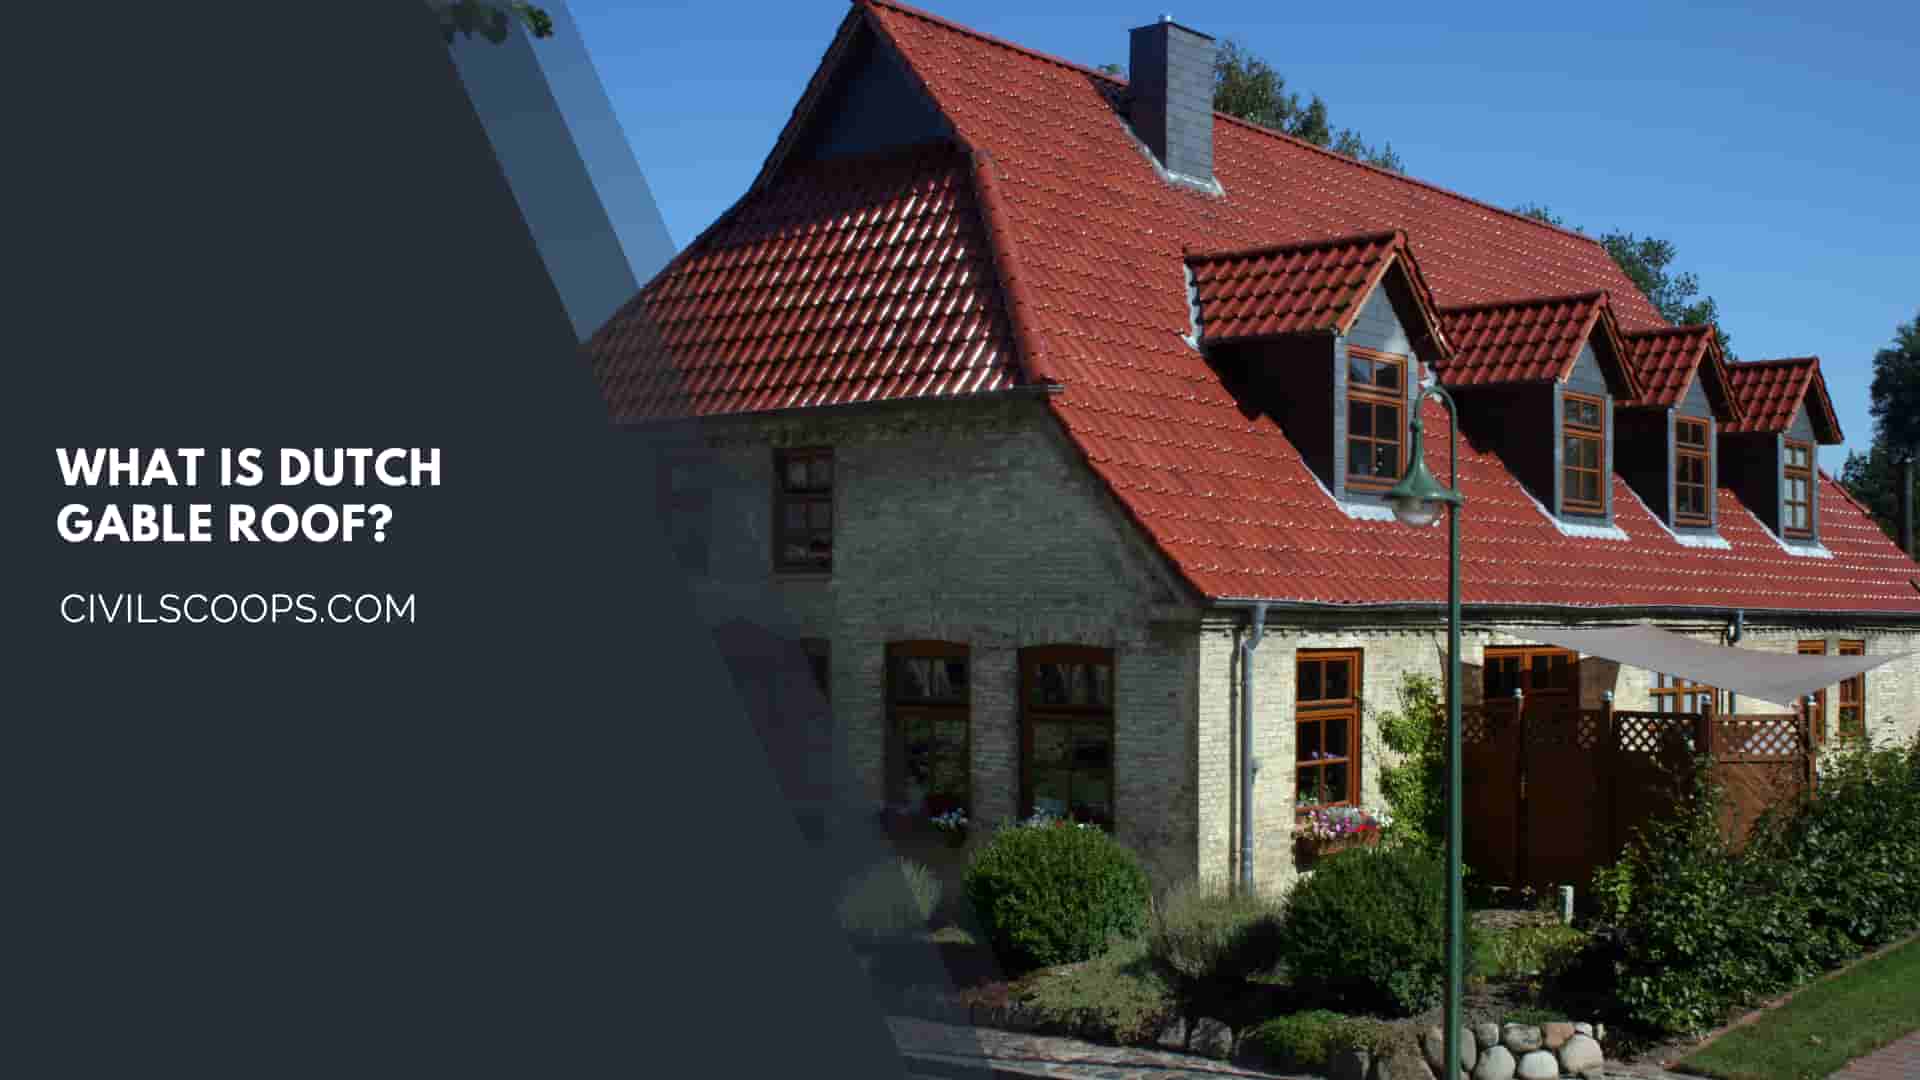 What Is Dutch Gable Roof?